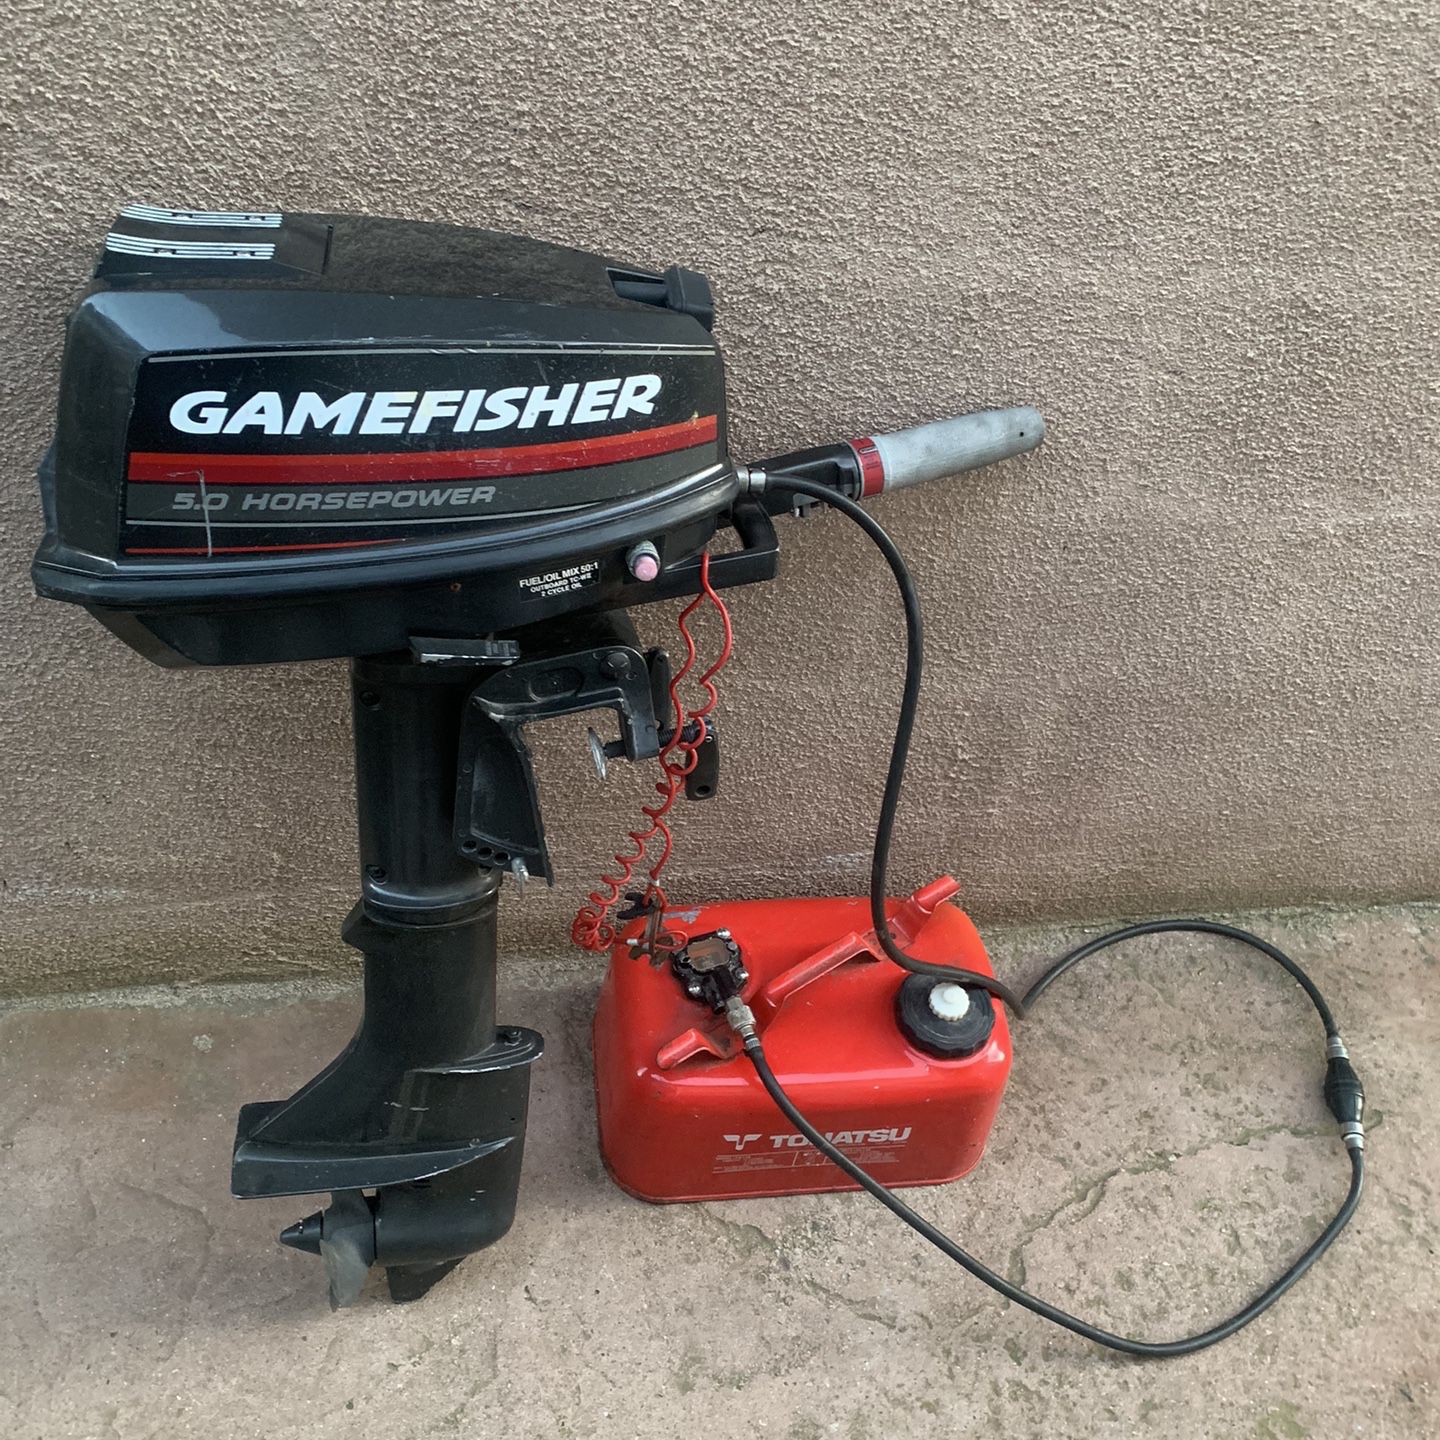 Game Fisher Outboard 5 Hp